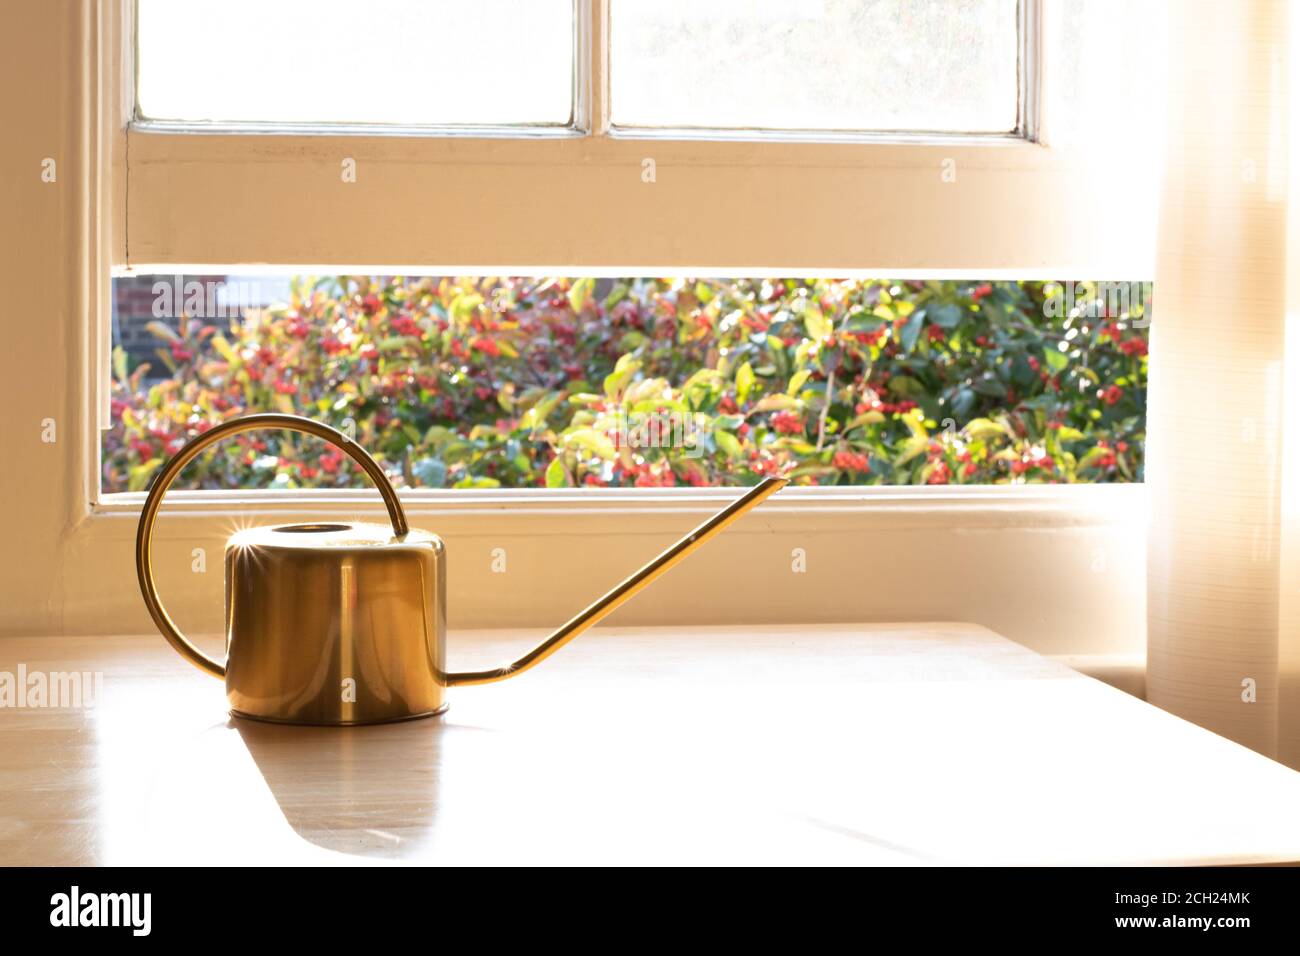 A fancy indoor watering can for plants in a beautifully designed home or apartment interior. Stock Photo